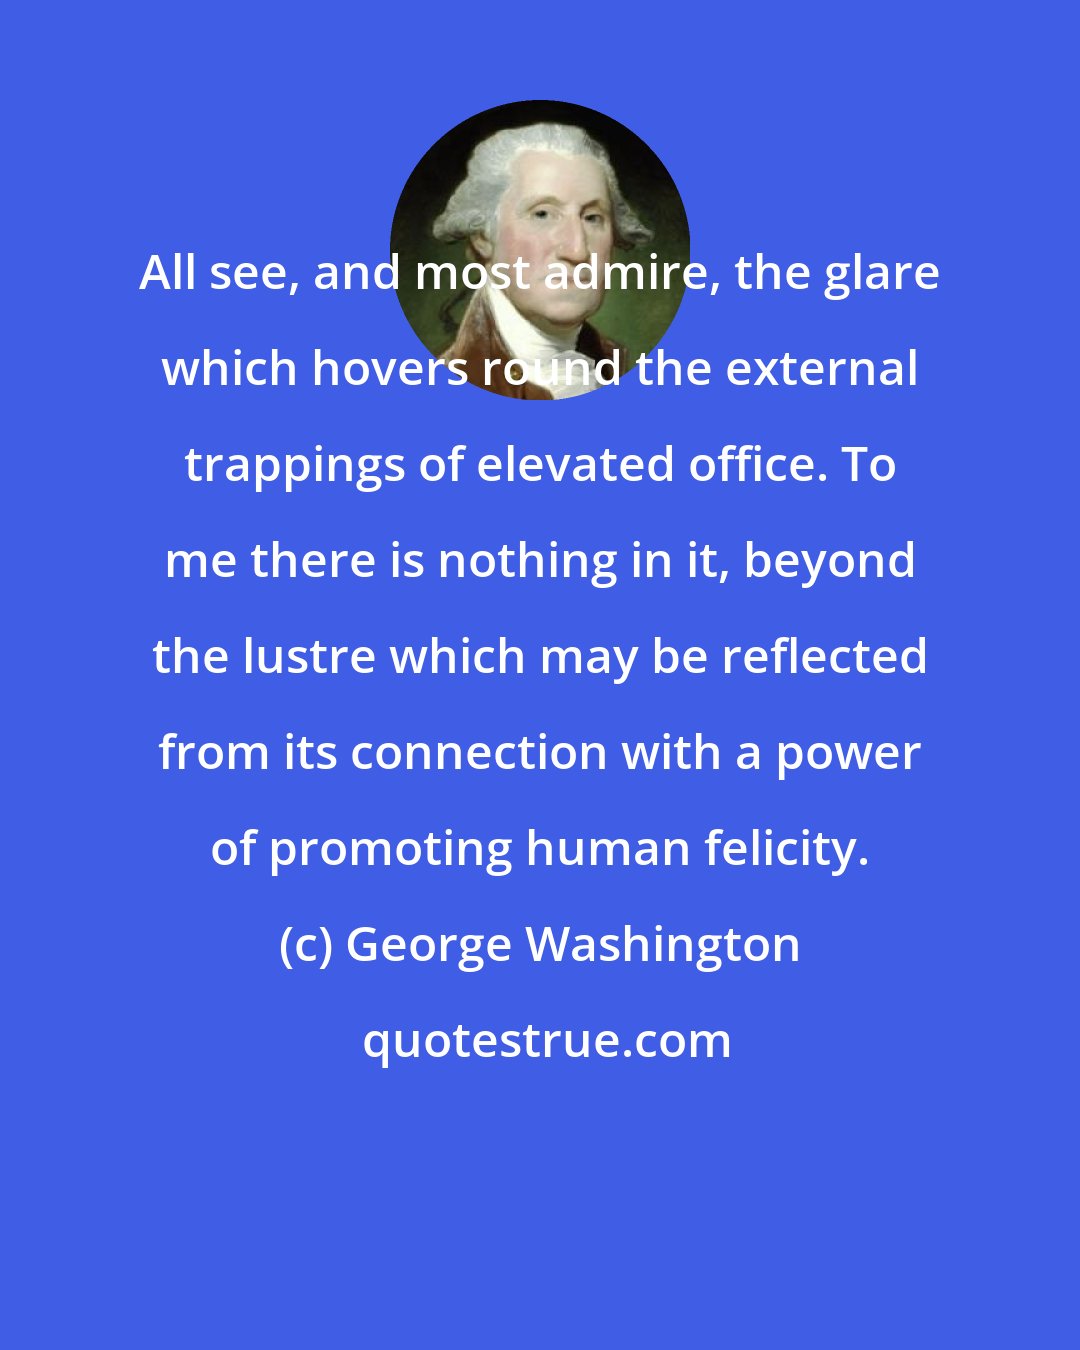 George Washington: All see, and most admire, the glare which hovers round the external trappings of elevated office. To me there is nothing in it, beyond the lustre which may be reflected from its connection with a power of promoting human felicity.